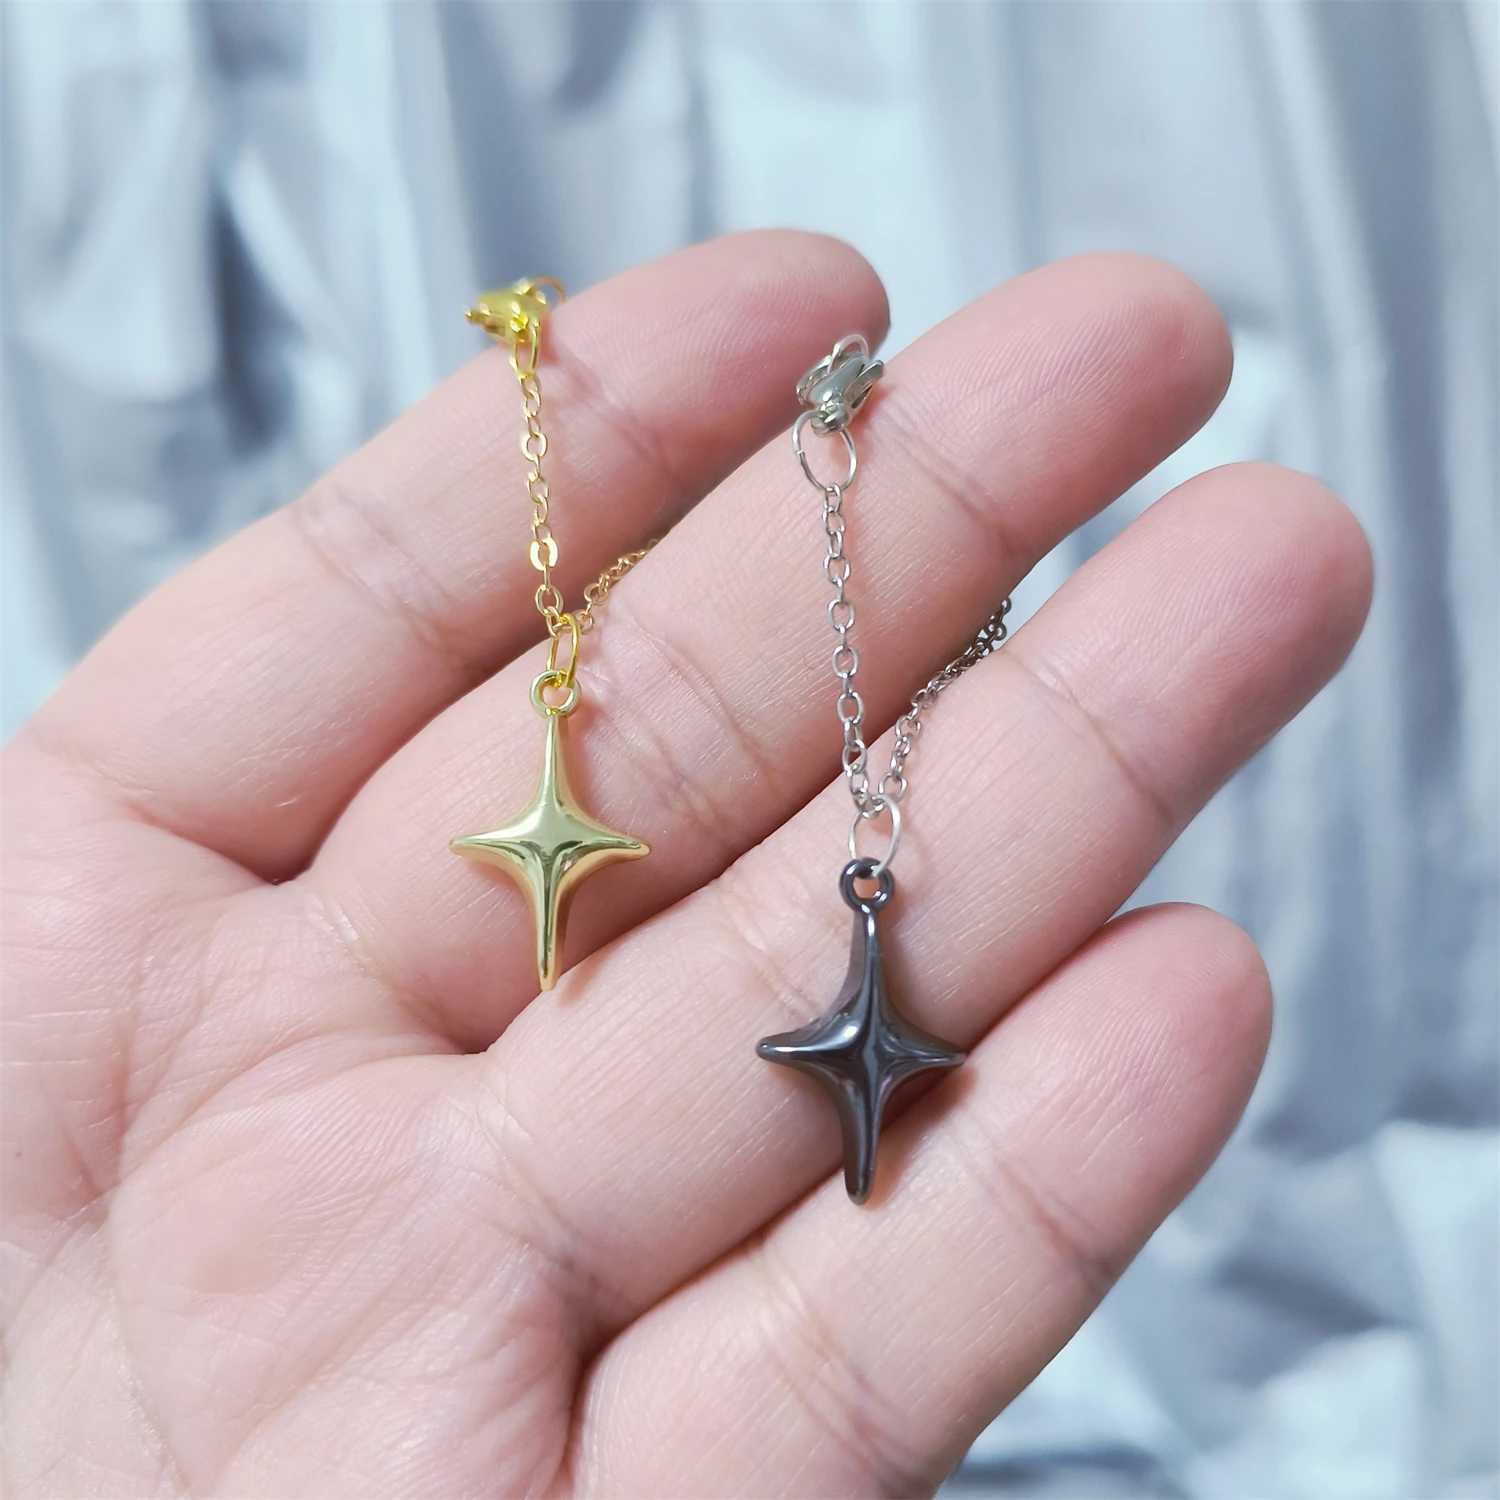 For BJD 1/6 Scale Blyth OB Doll Size Simulation Big Star Necklace Mini Tiny Accessories Decoration Alloy Prop Fashion 1 18 scale diecast ford equator off road suv simulation alloy car model boy gift collection vehicle